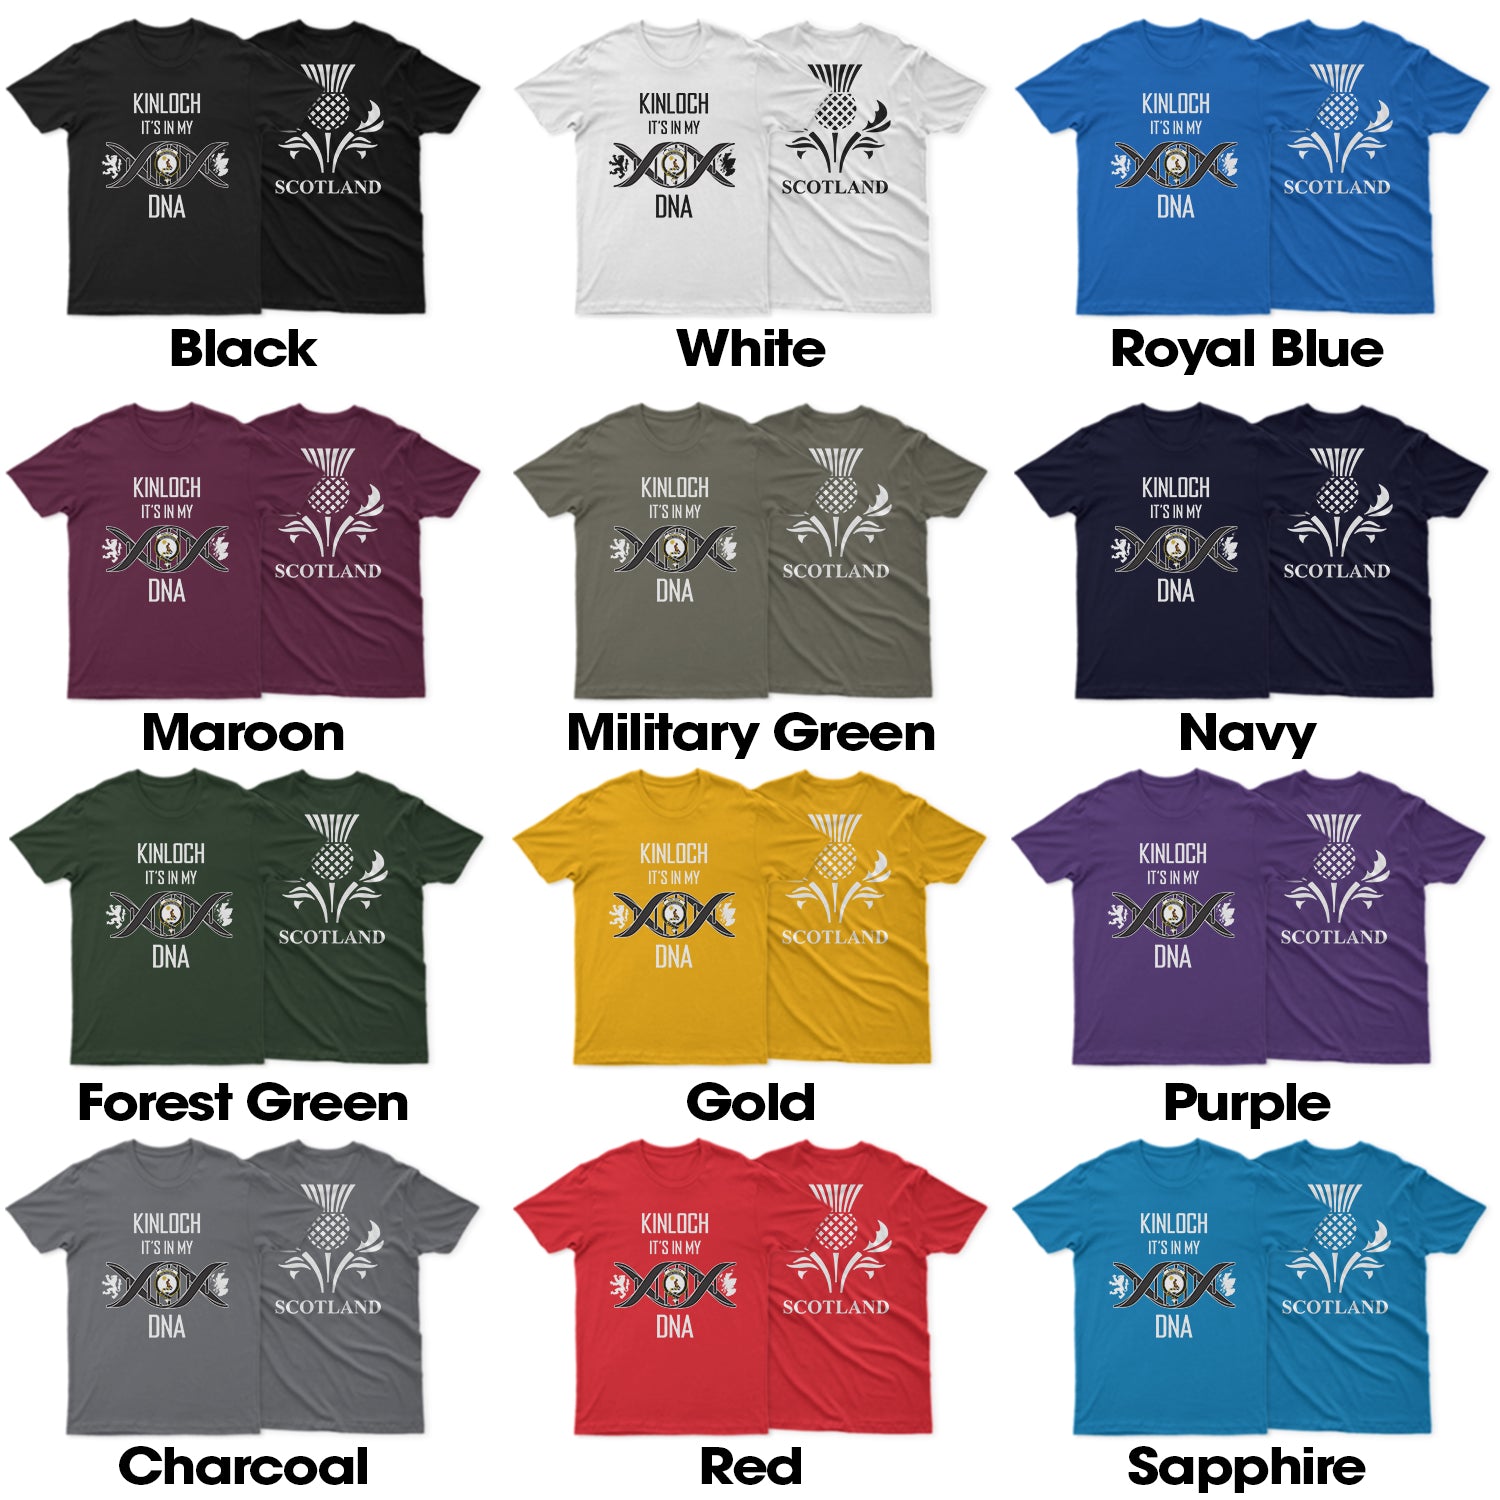 kinloch-family-crest-dna-in-me-mens-t-shirt